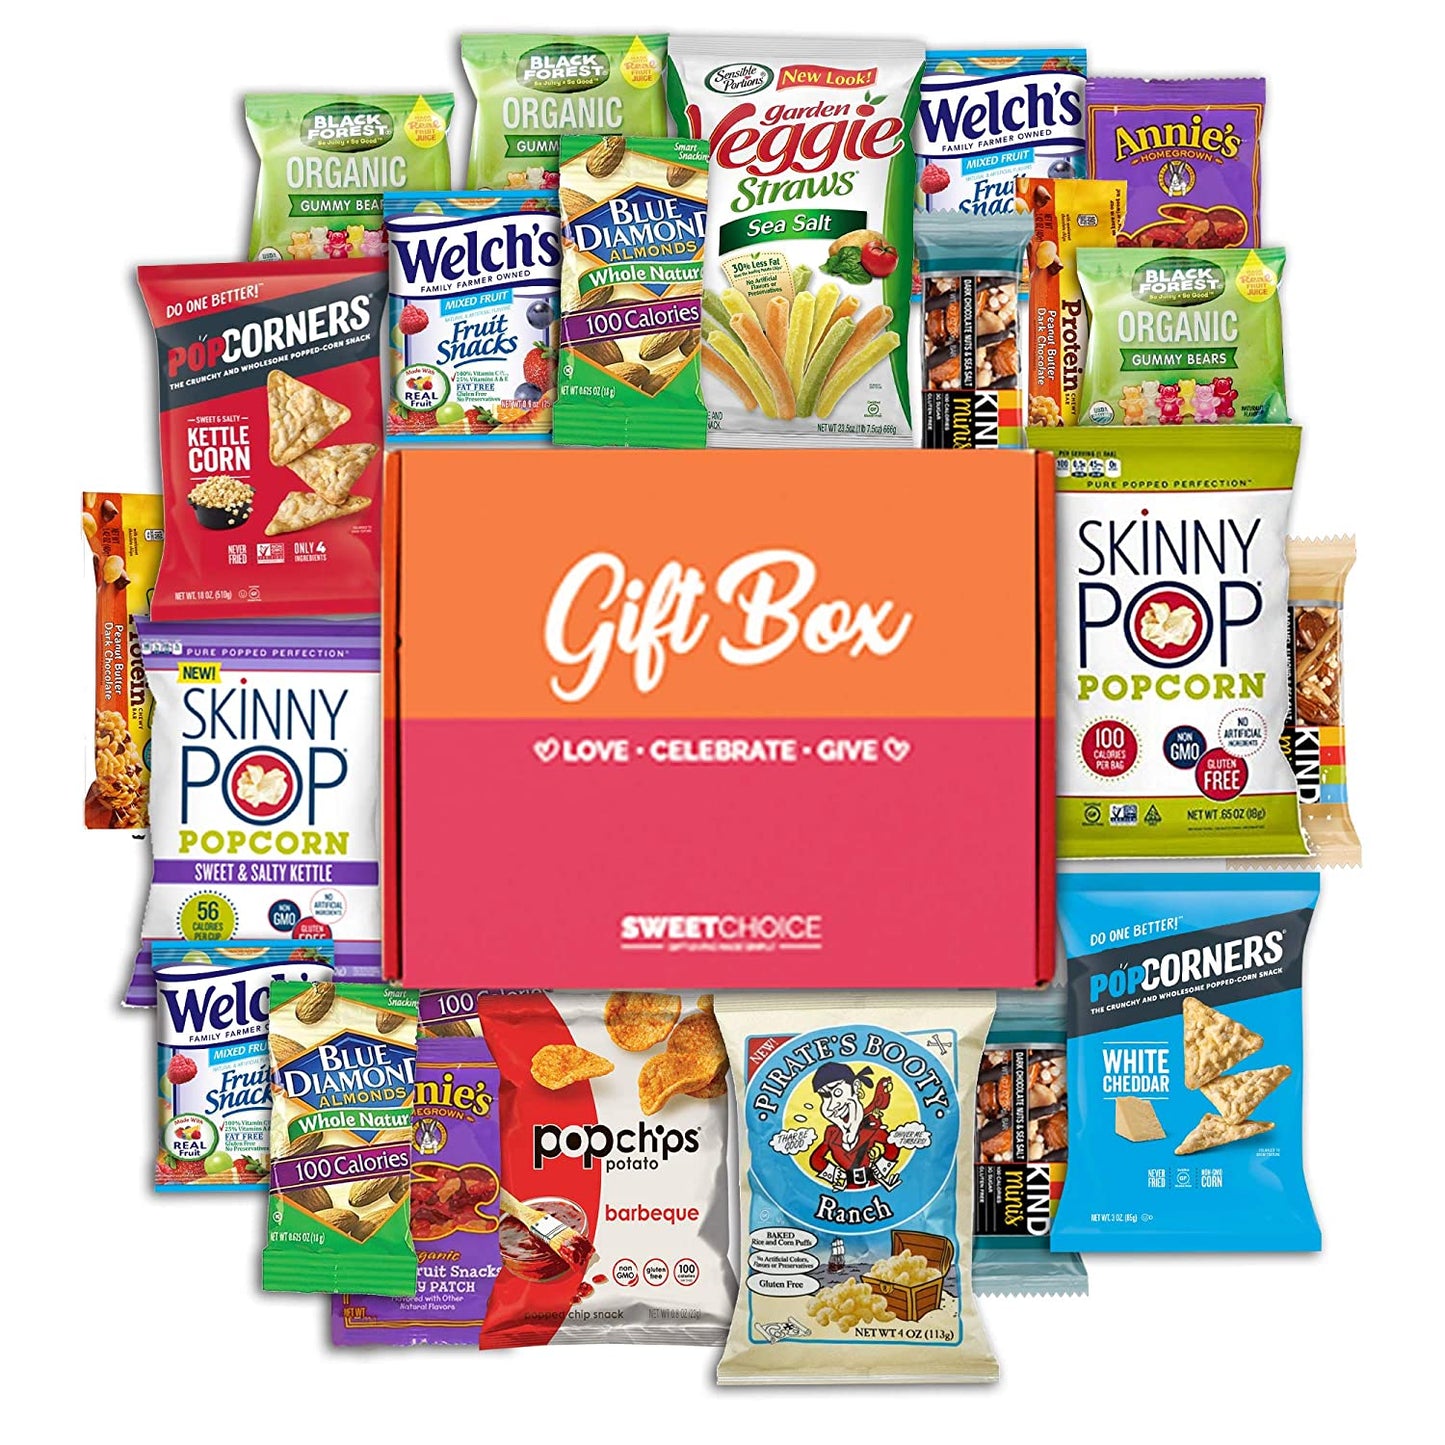 Snack Box Gluten Free Healthy Snacks Care Package (20 Count) for College Students, Exams, Father's Day, Mothers Day,Military, Finals, Office and Gift Ideas. Chips, Popcorn, and granola Bars.